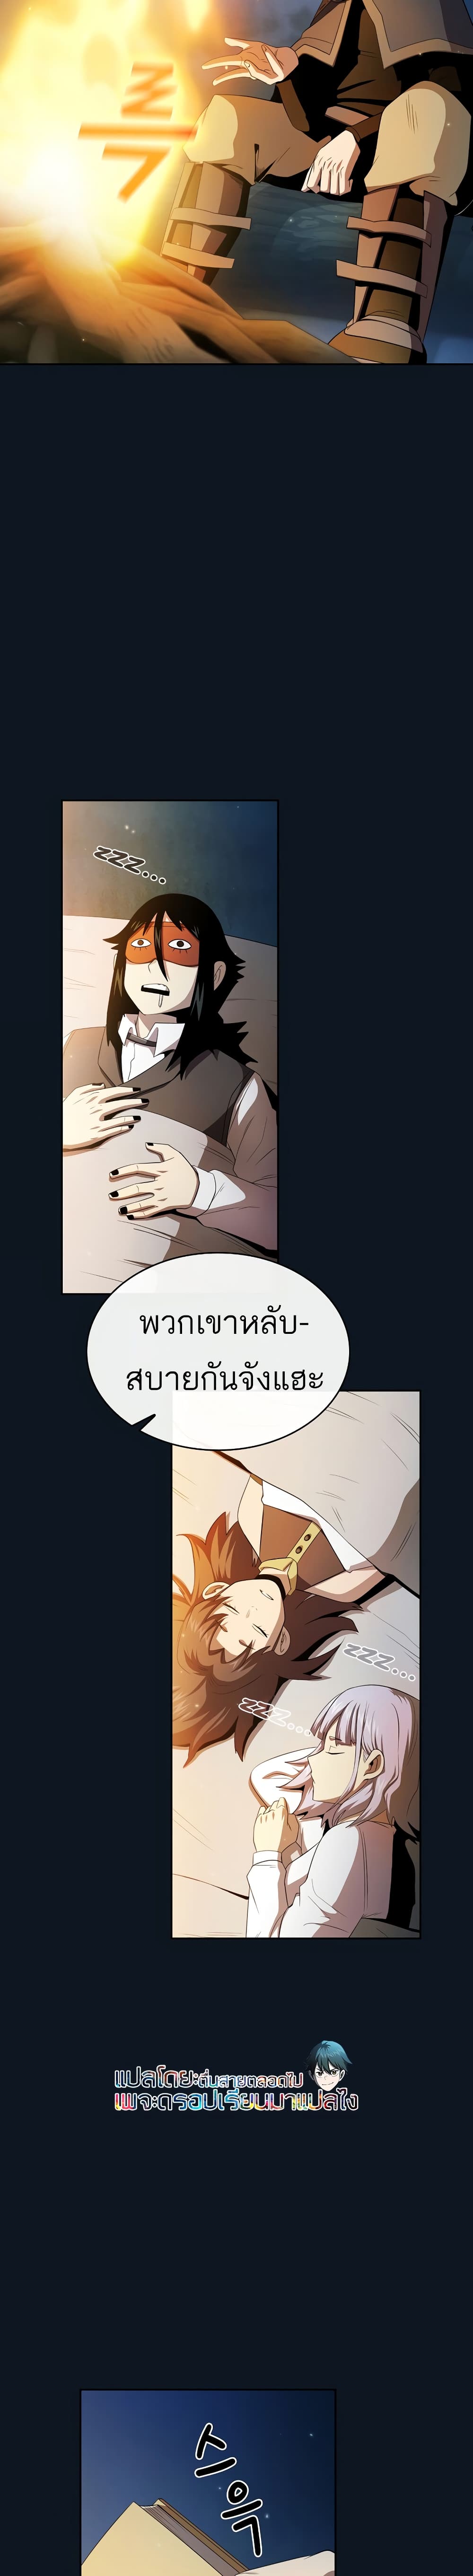 Is This Hero for Real à¸à¸­à¸à¸à¸µà¹ 33 (13)